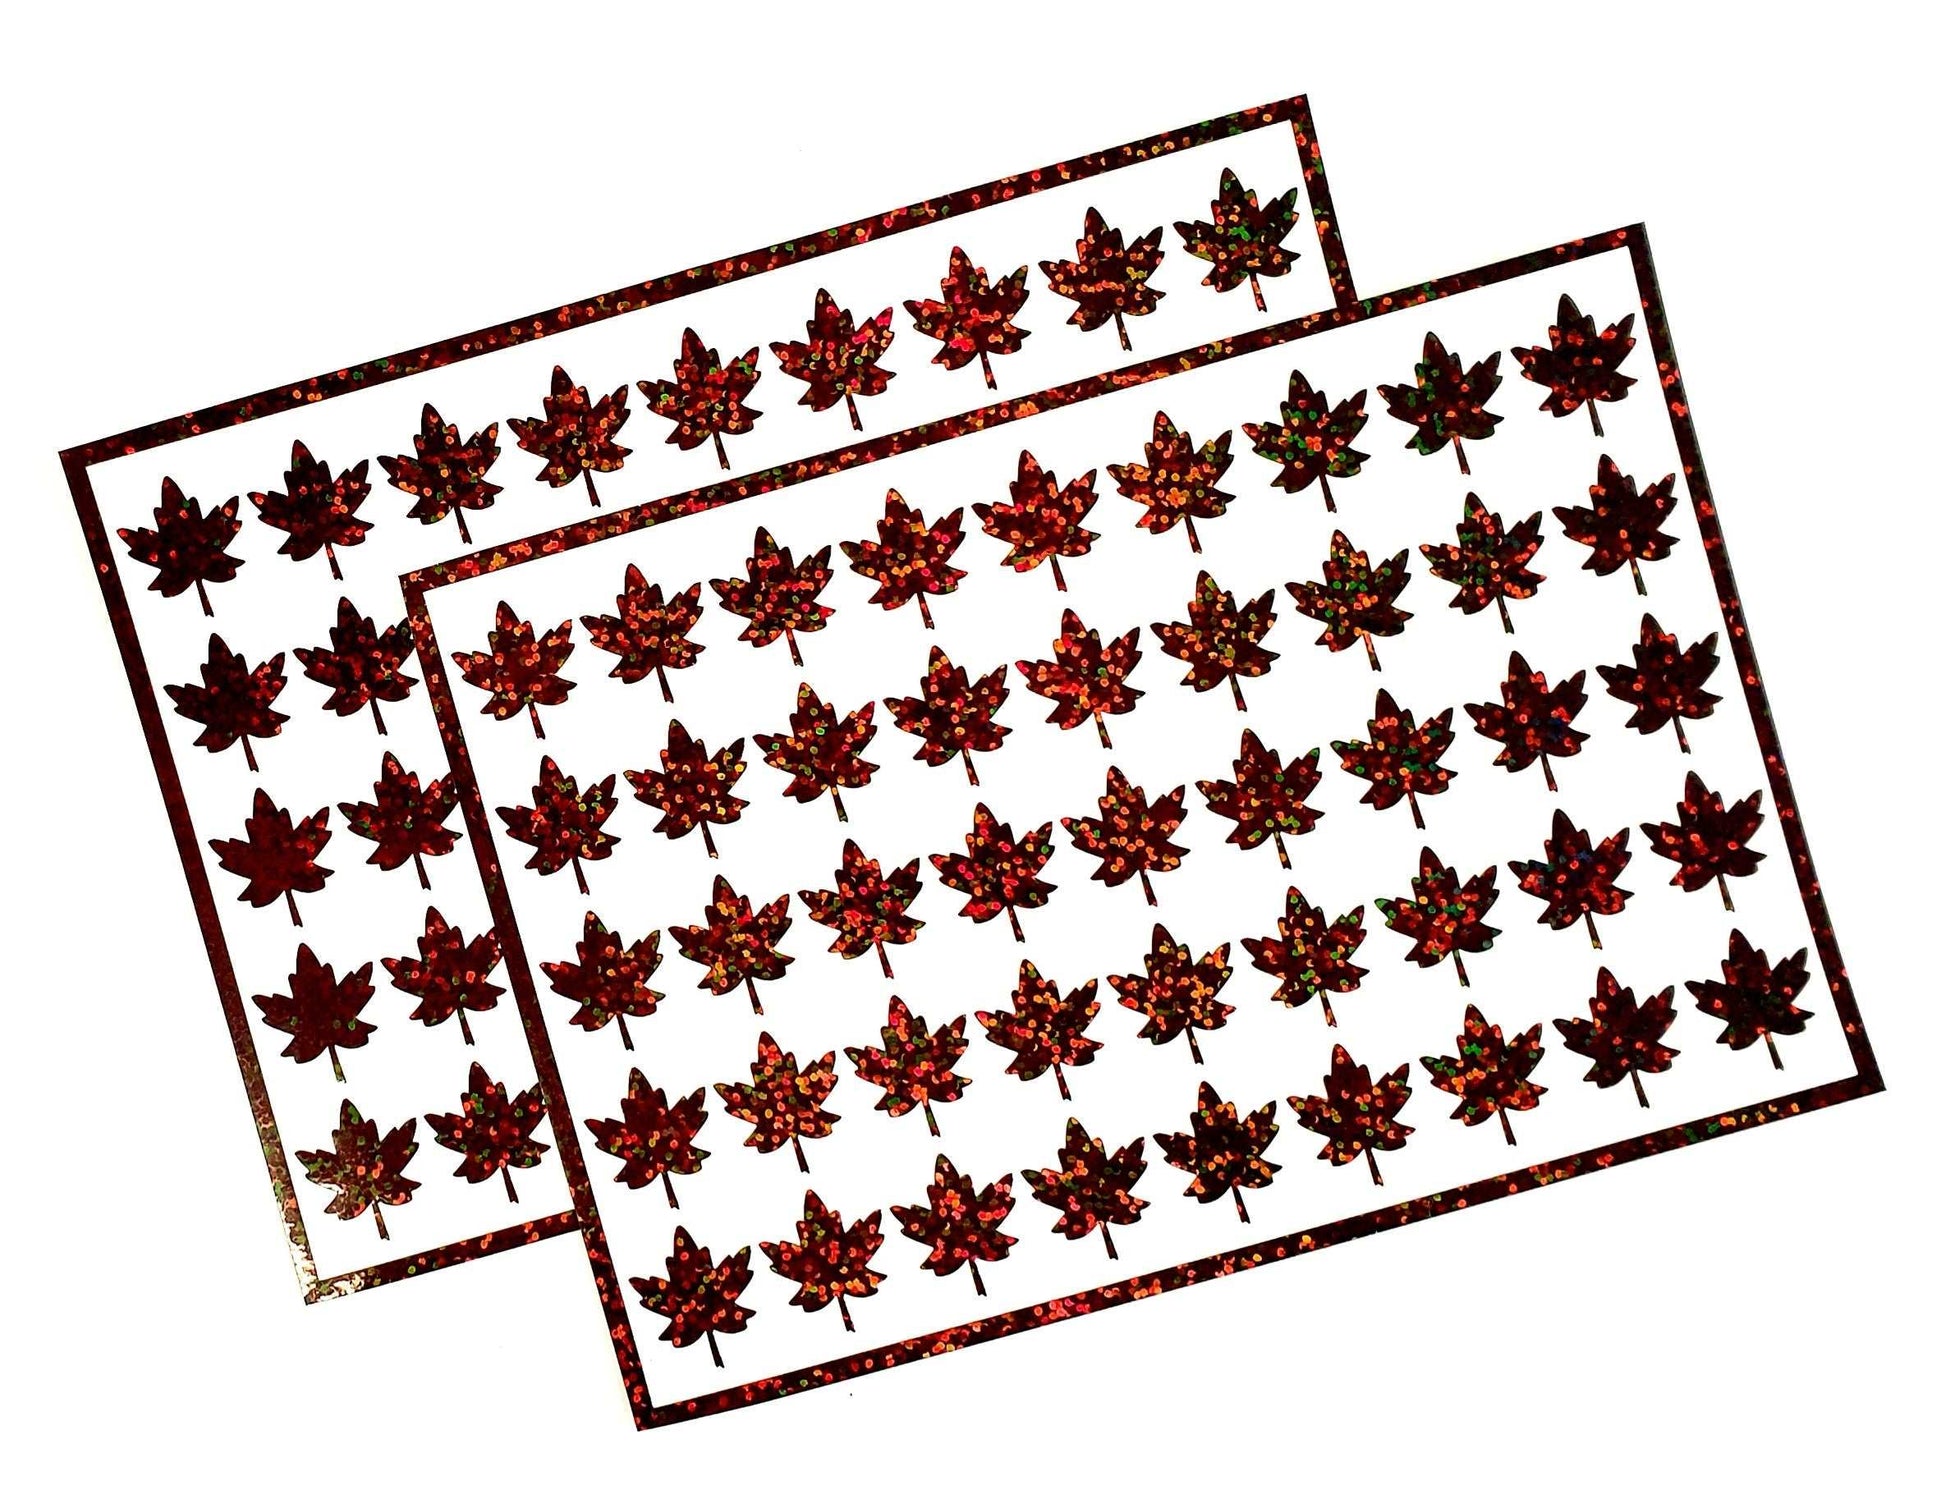 Brown Maple Leaves Sticker Sheet, set of 45 leaf vinyl decals for Autumn weddings, fall decor, planners, scrapbook pages and Thanksgiving.